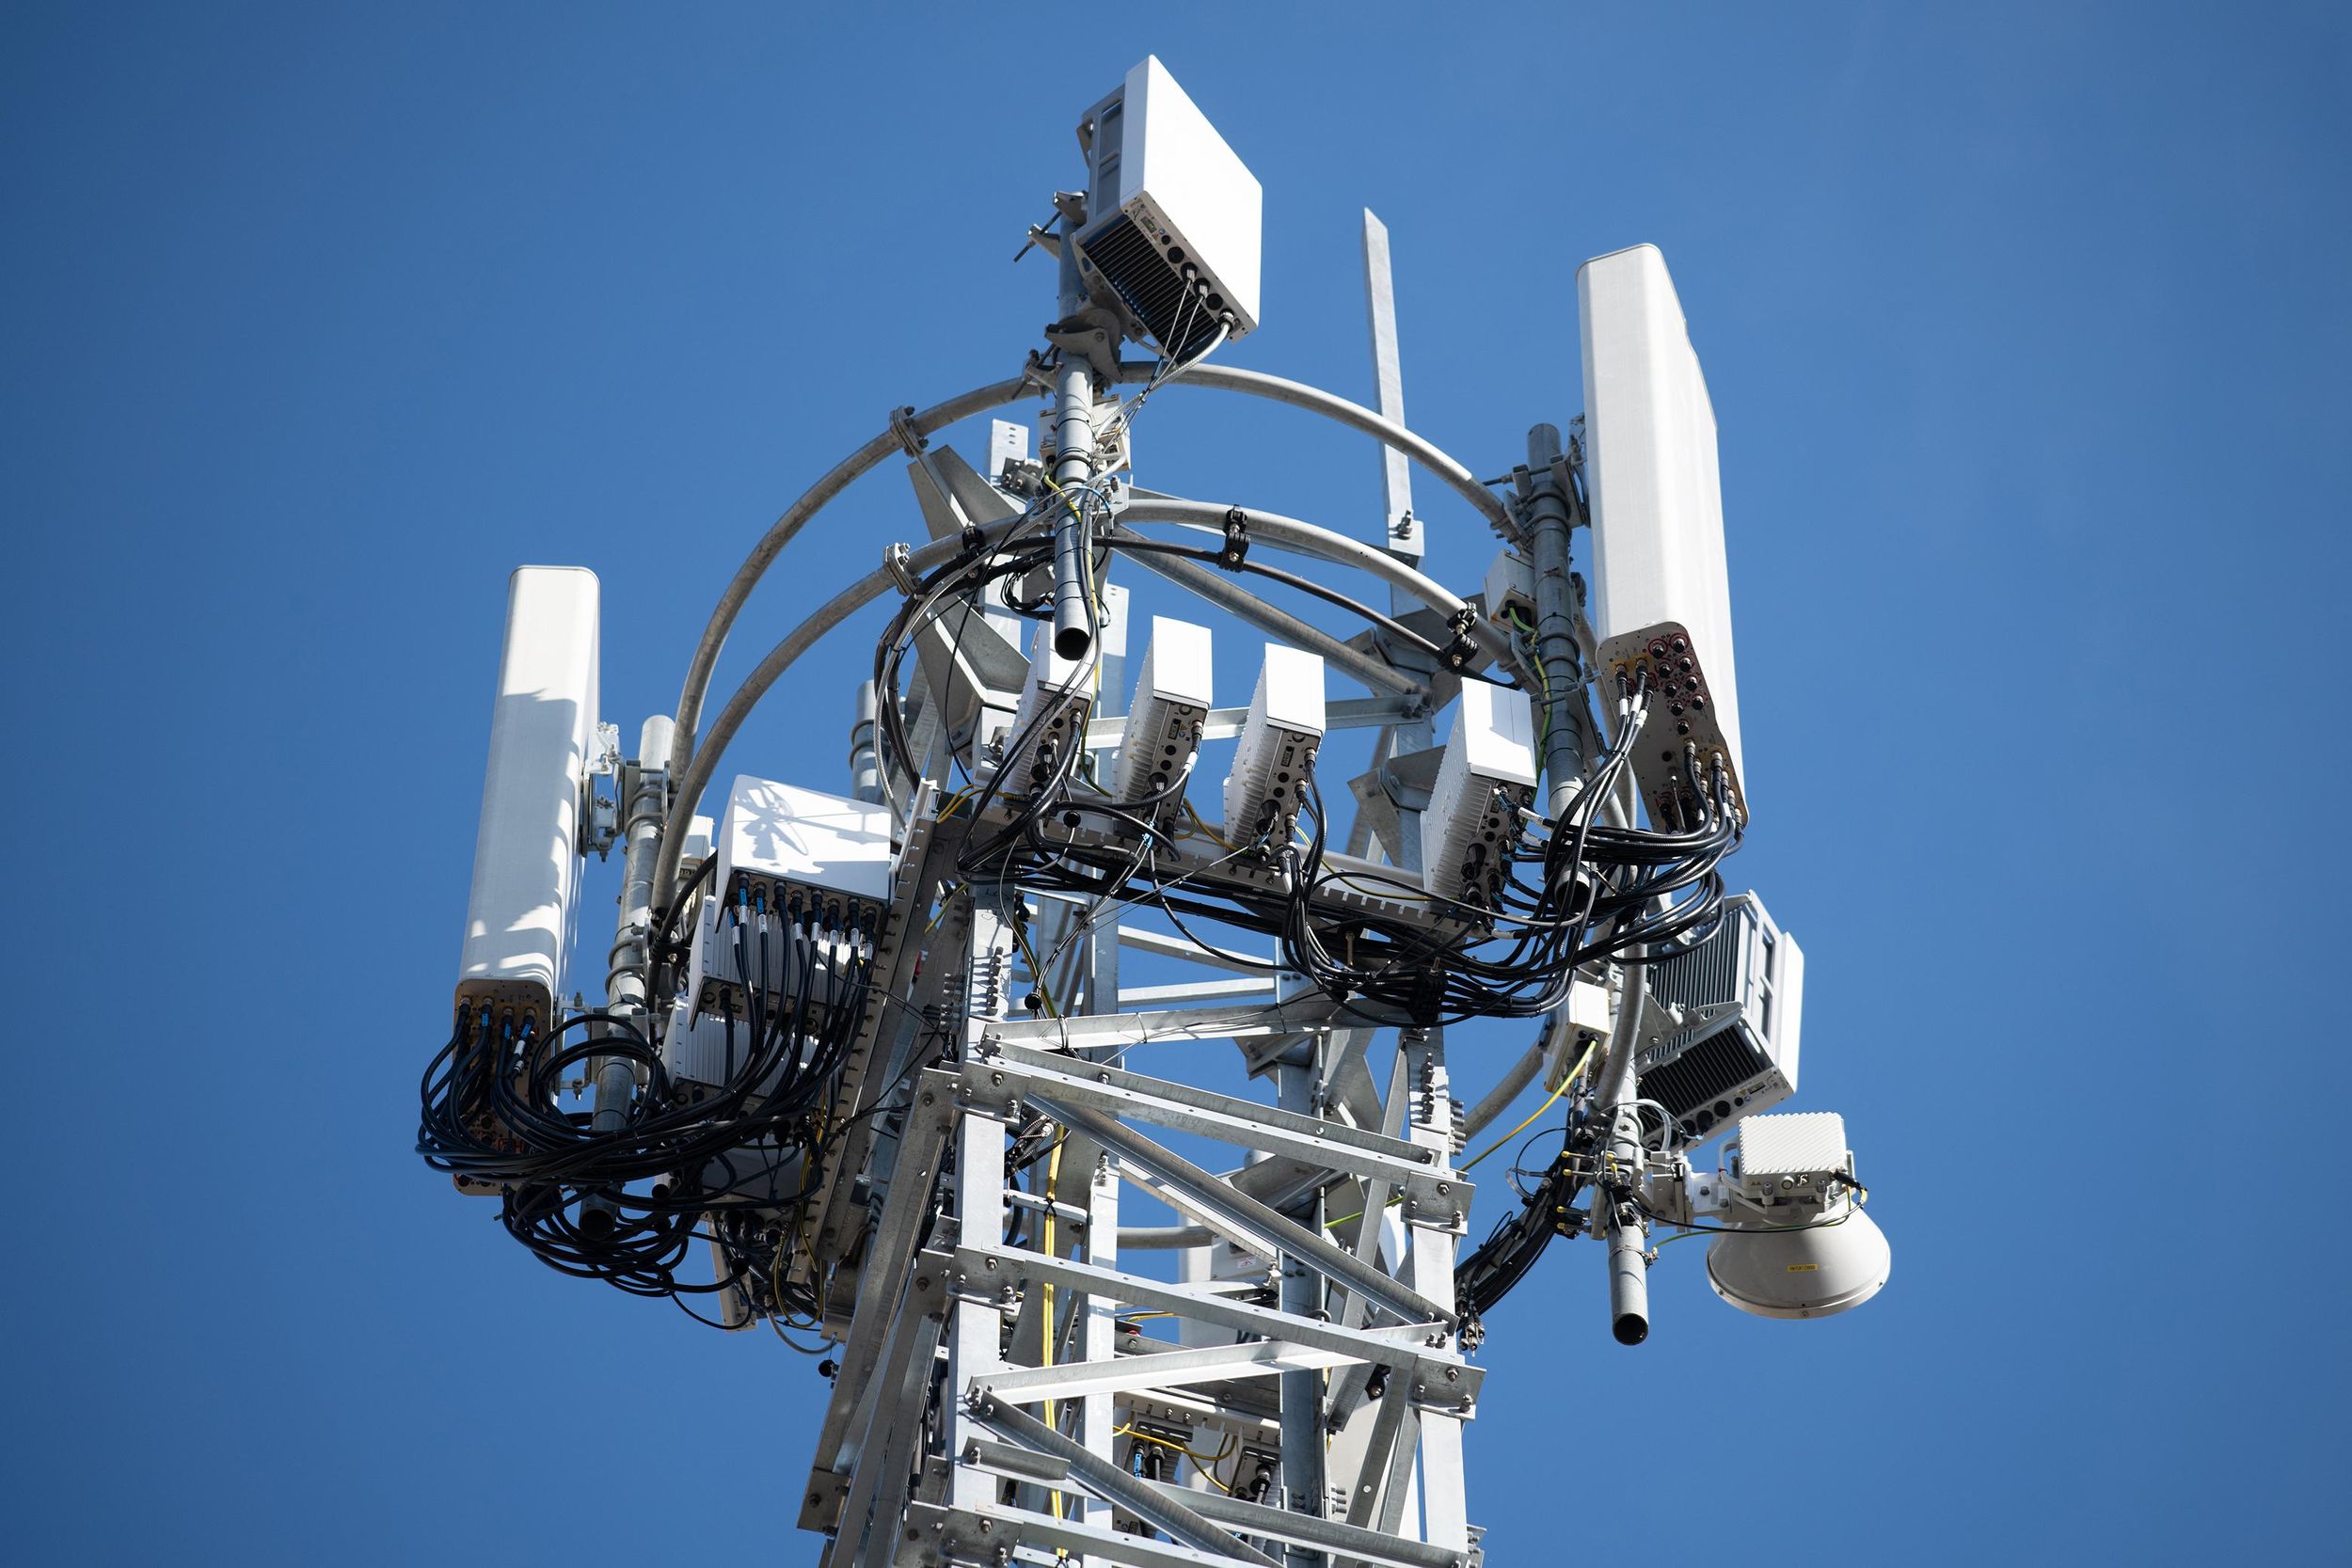 The top of a mobile phone mast covered in telecommunications equipment is seen against a clear blue sky.